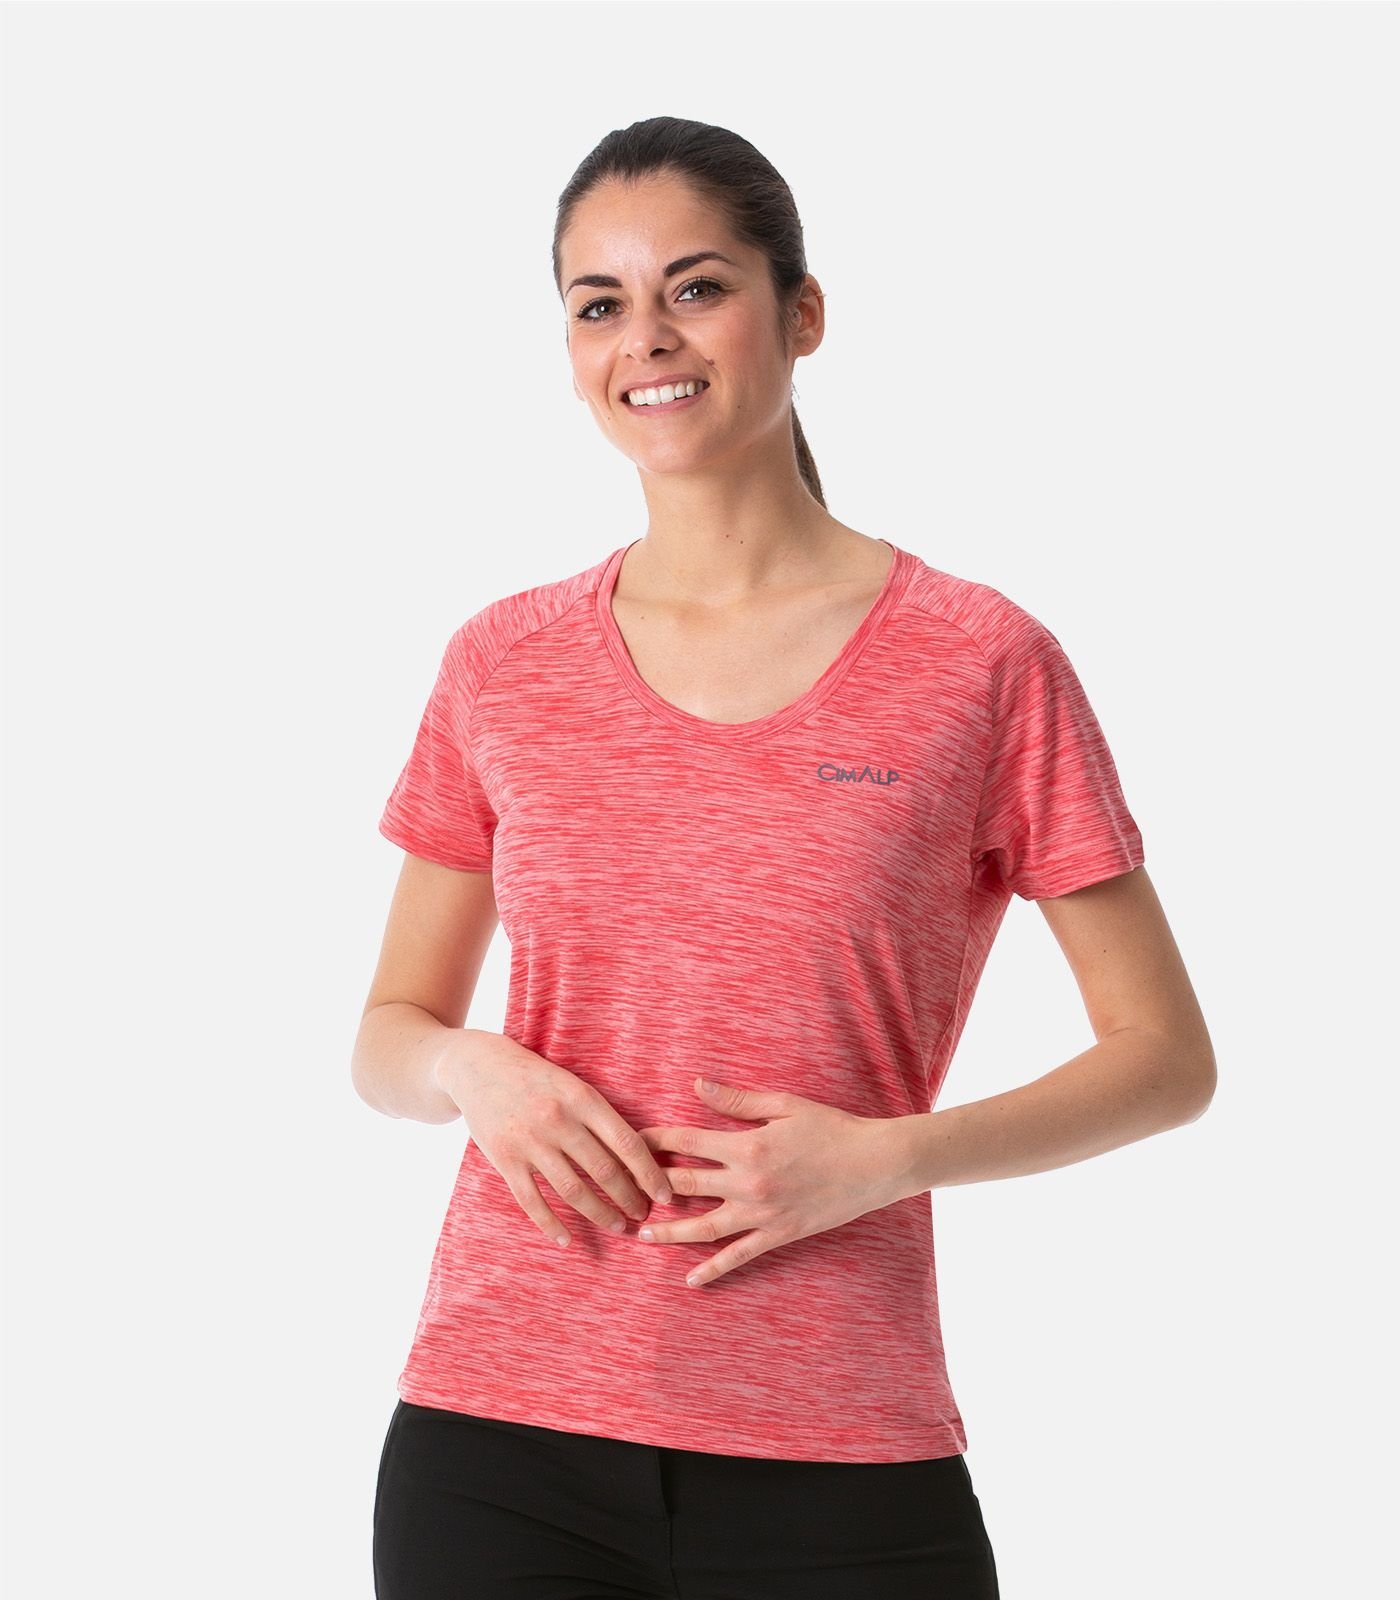 Smart-Dry breathable T-shirt - Round neck